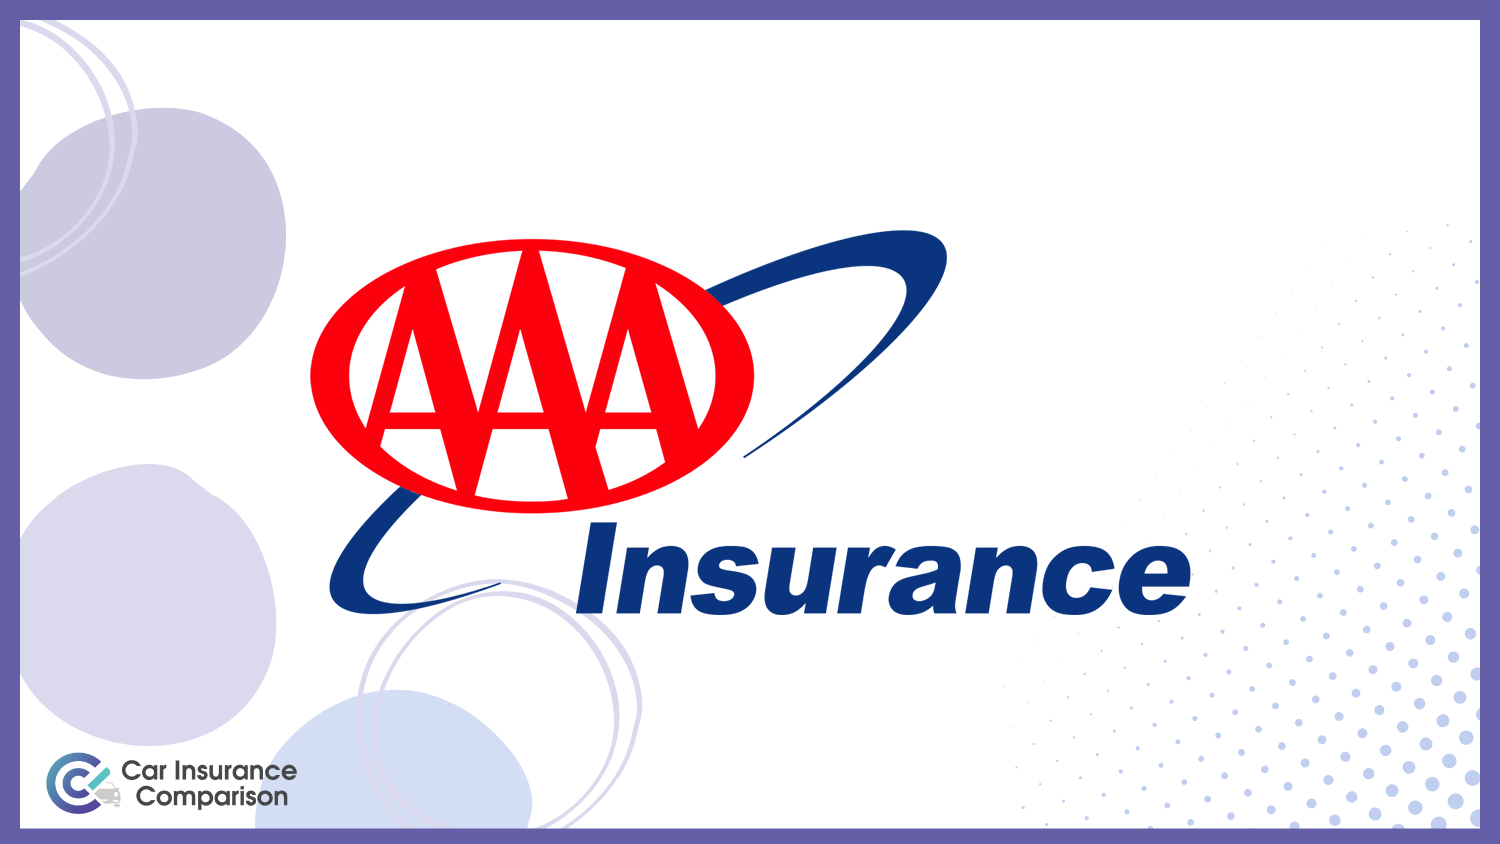 AAA: Best Car Insurance for Engineers 